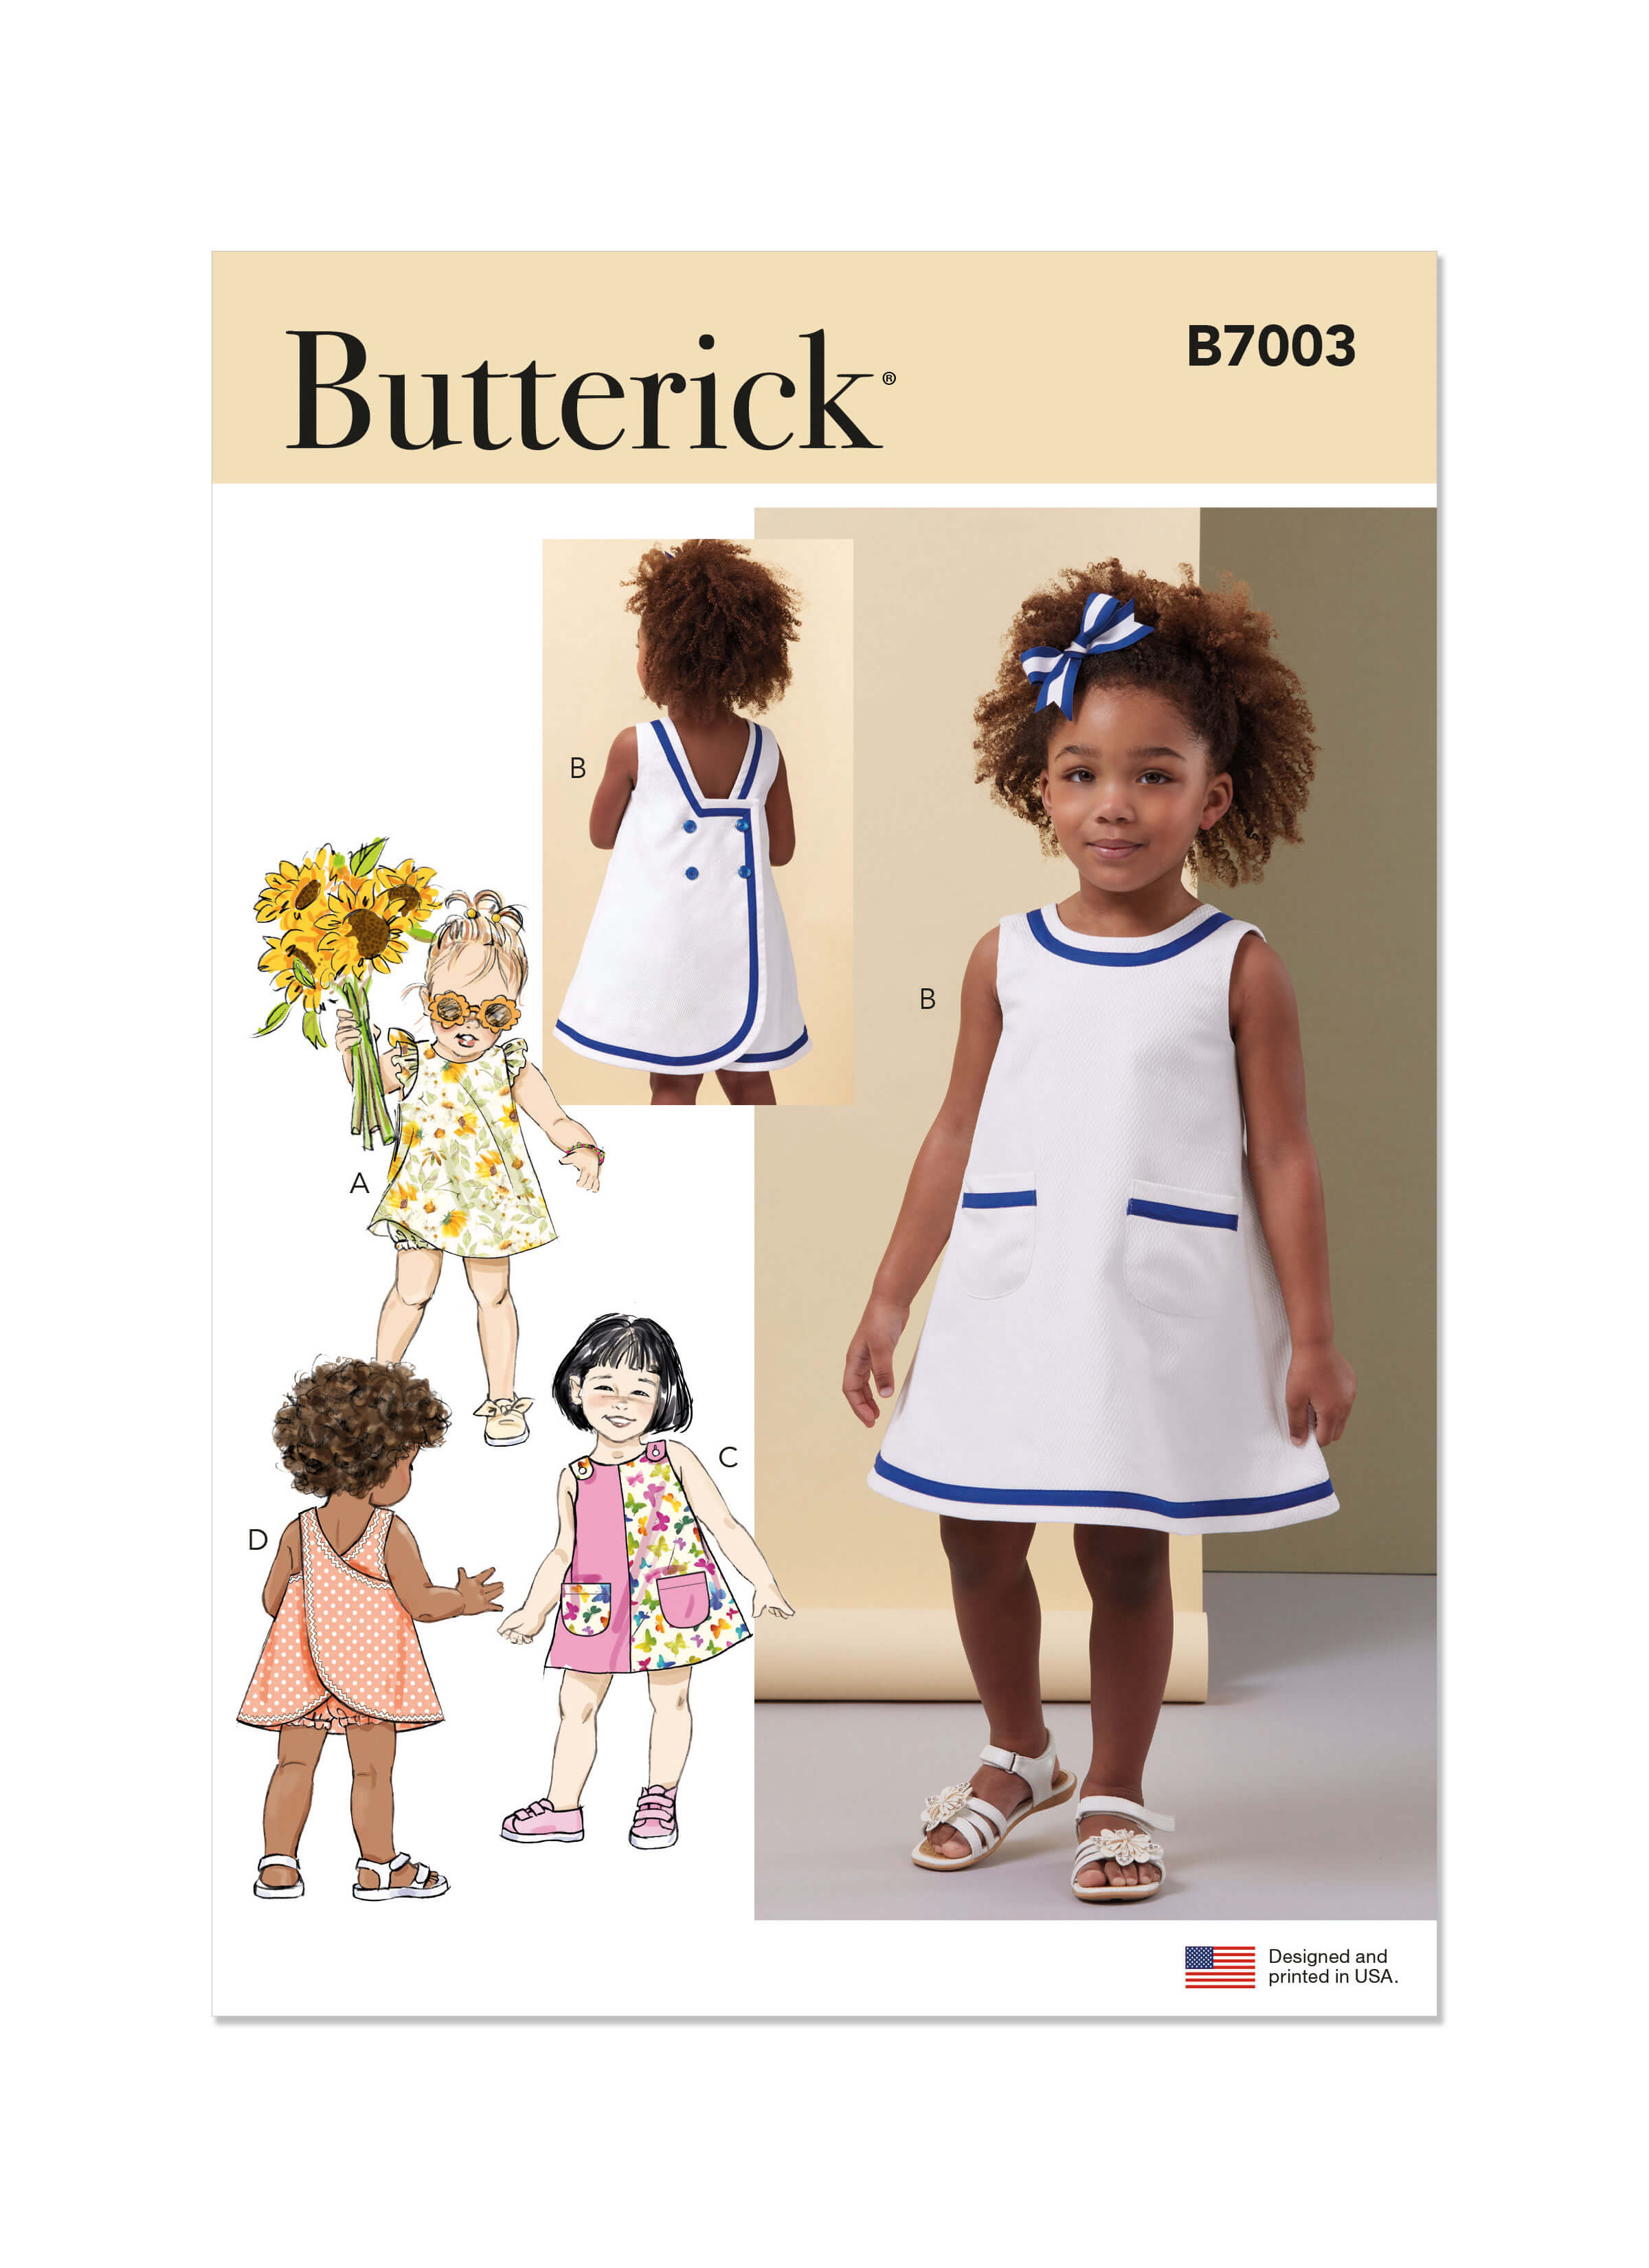 Butterick Sewing Pattern B7003 Toddlers' Dresses and Panties